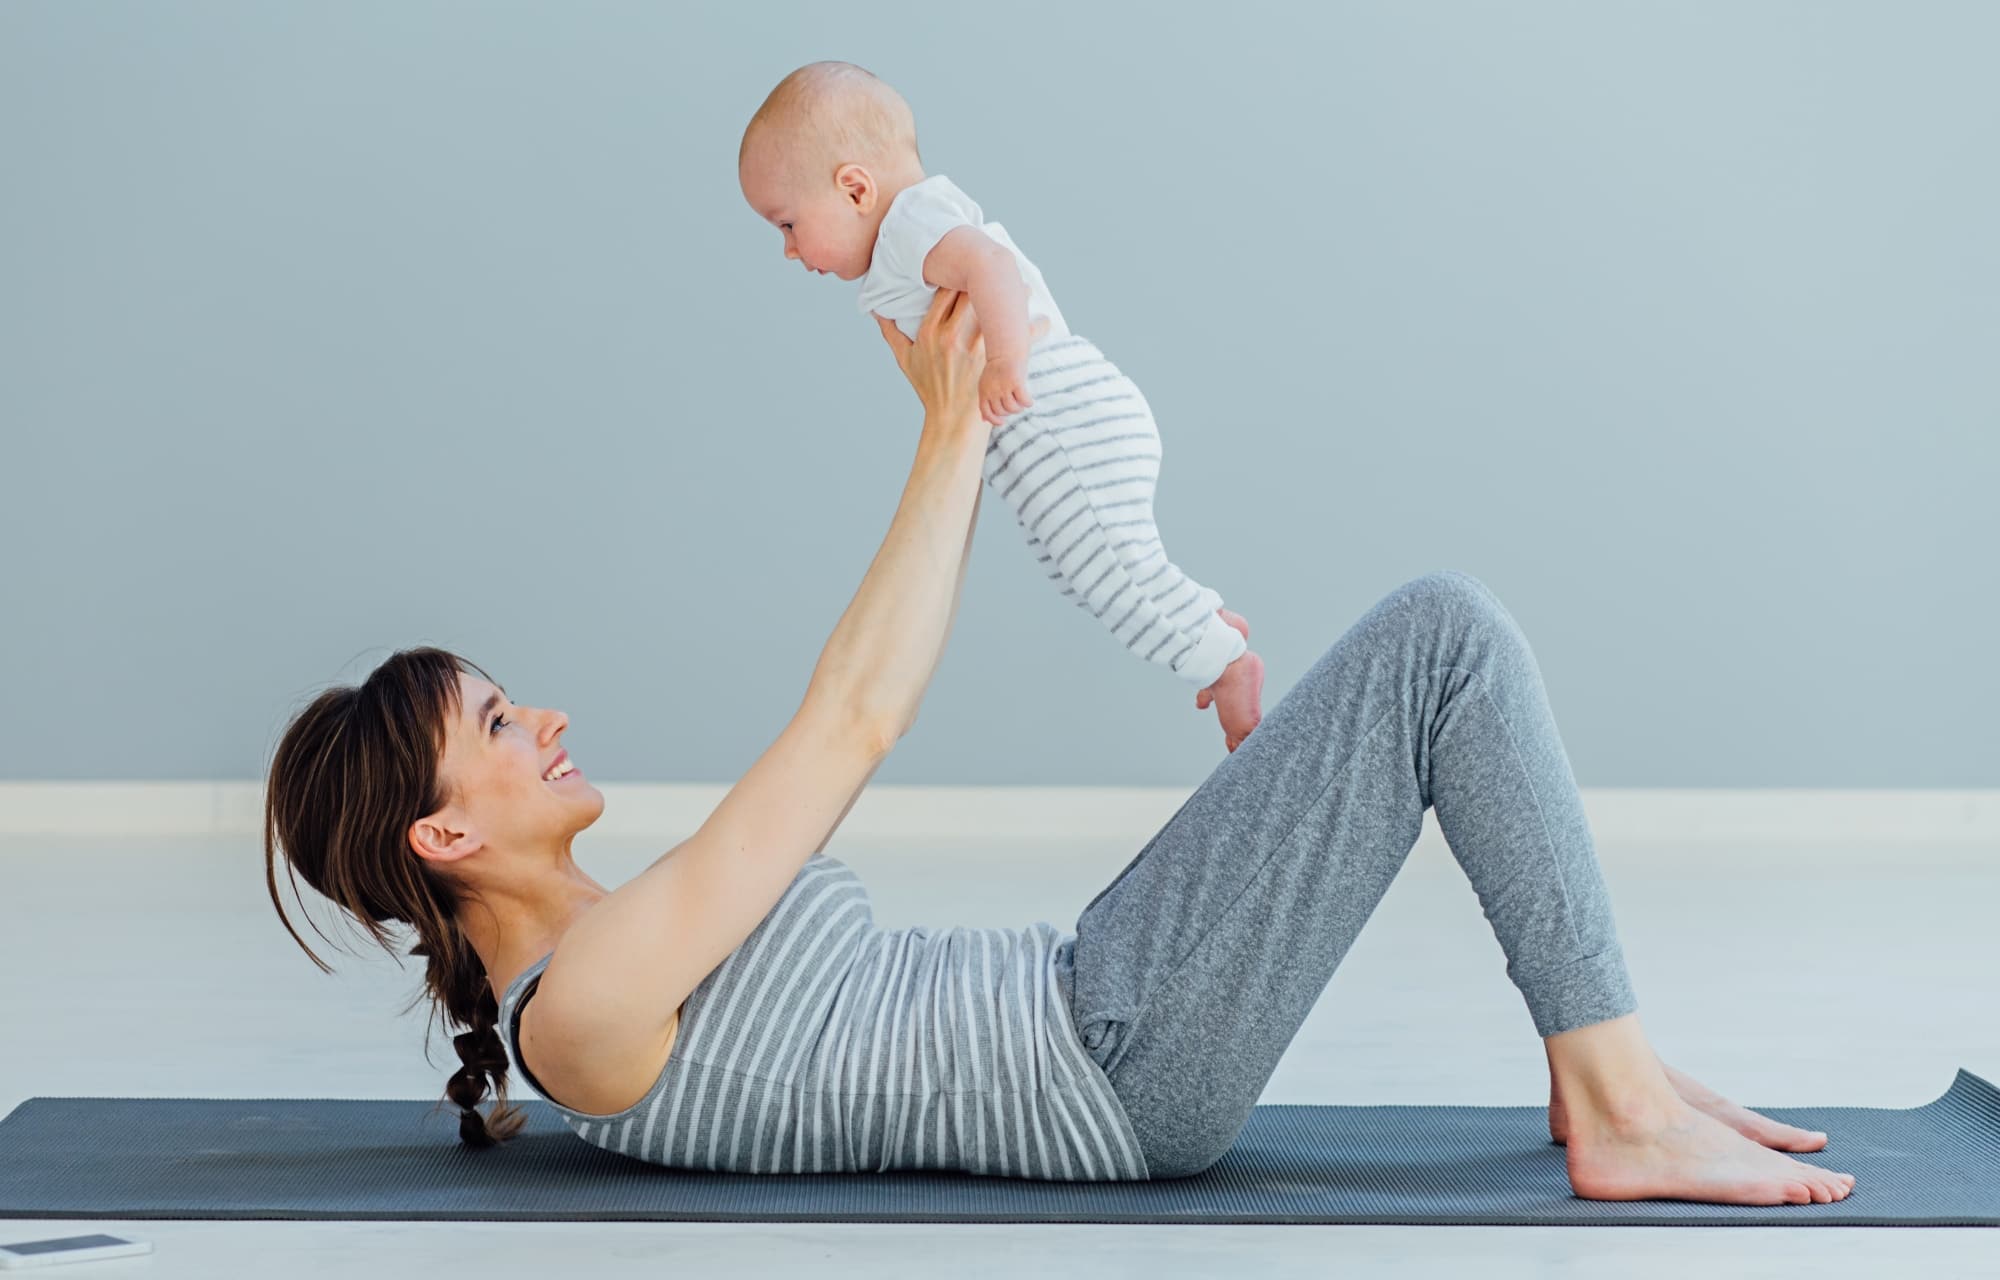 Naturopathy diet and yoga asanas for breastfeeding mothers | Fitness News -  The Indian Express